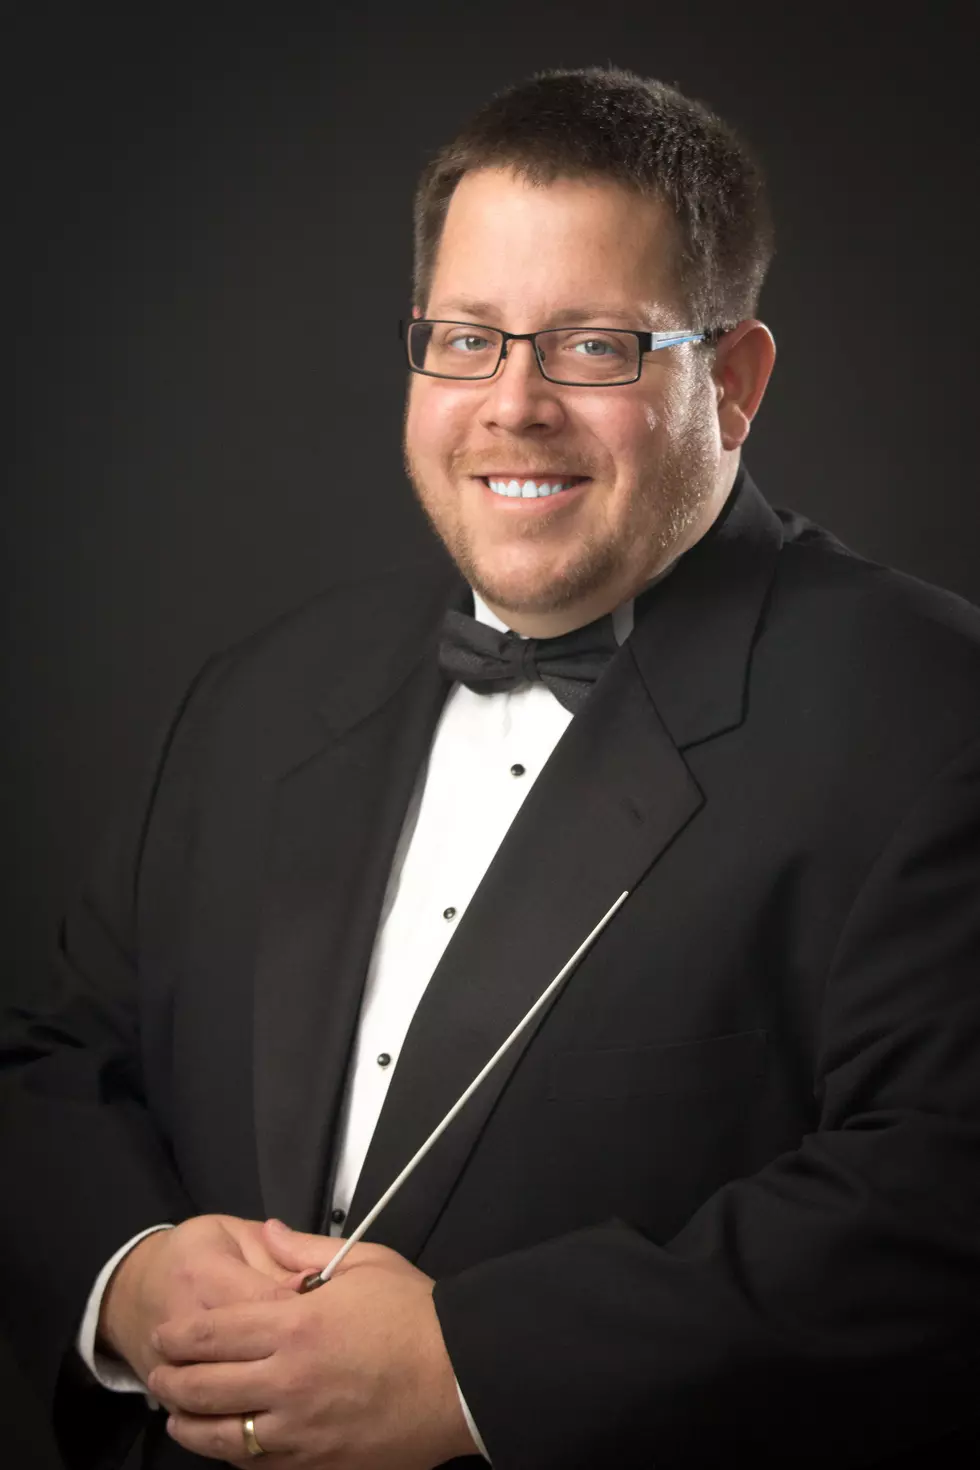 Daviess County High School Band Director Named Regional Arts Specialist